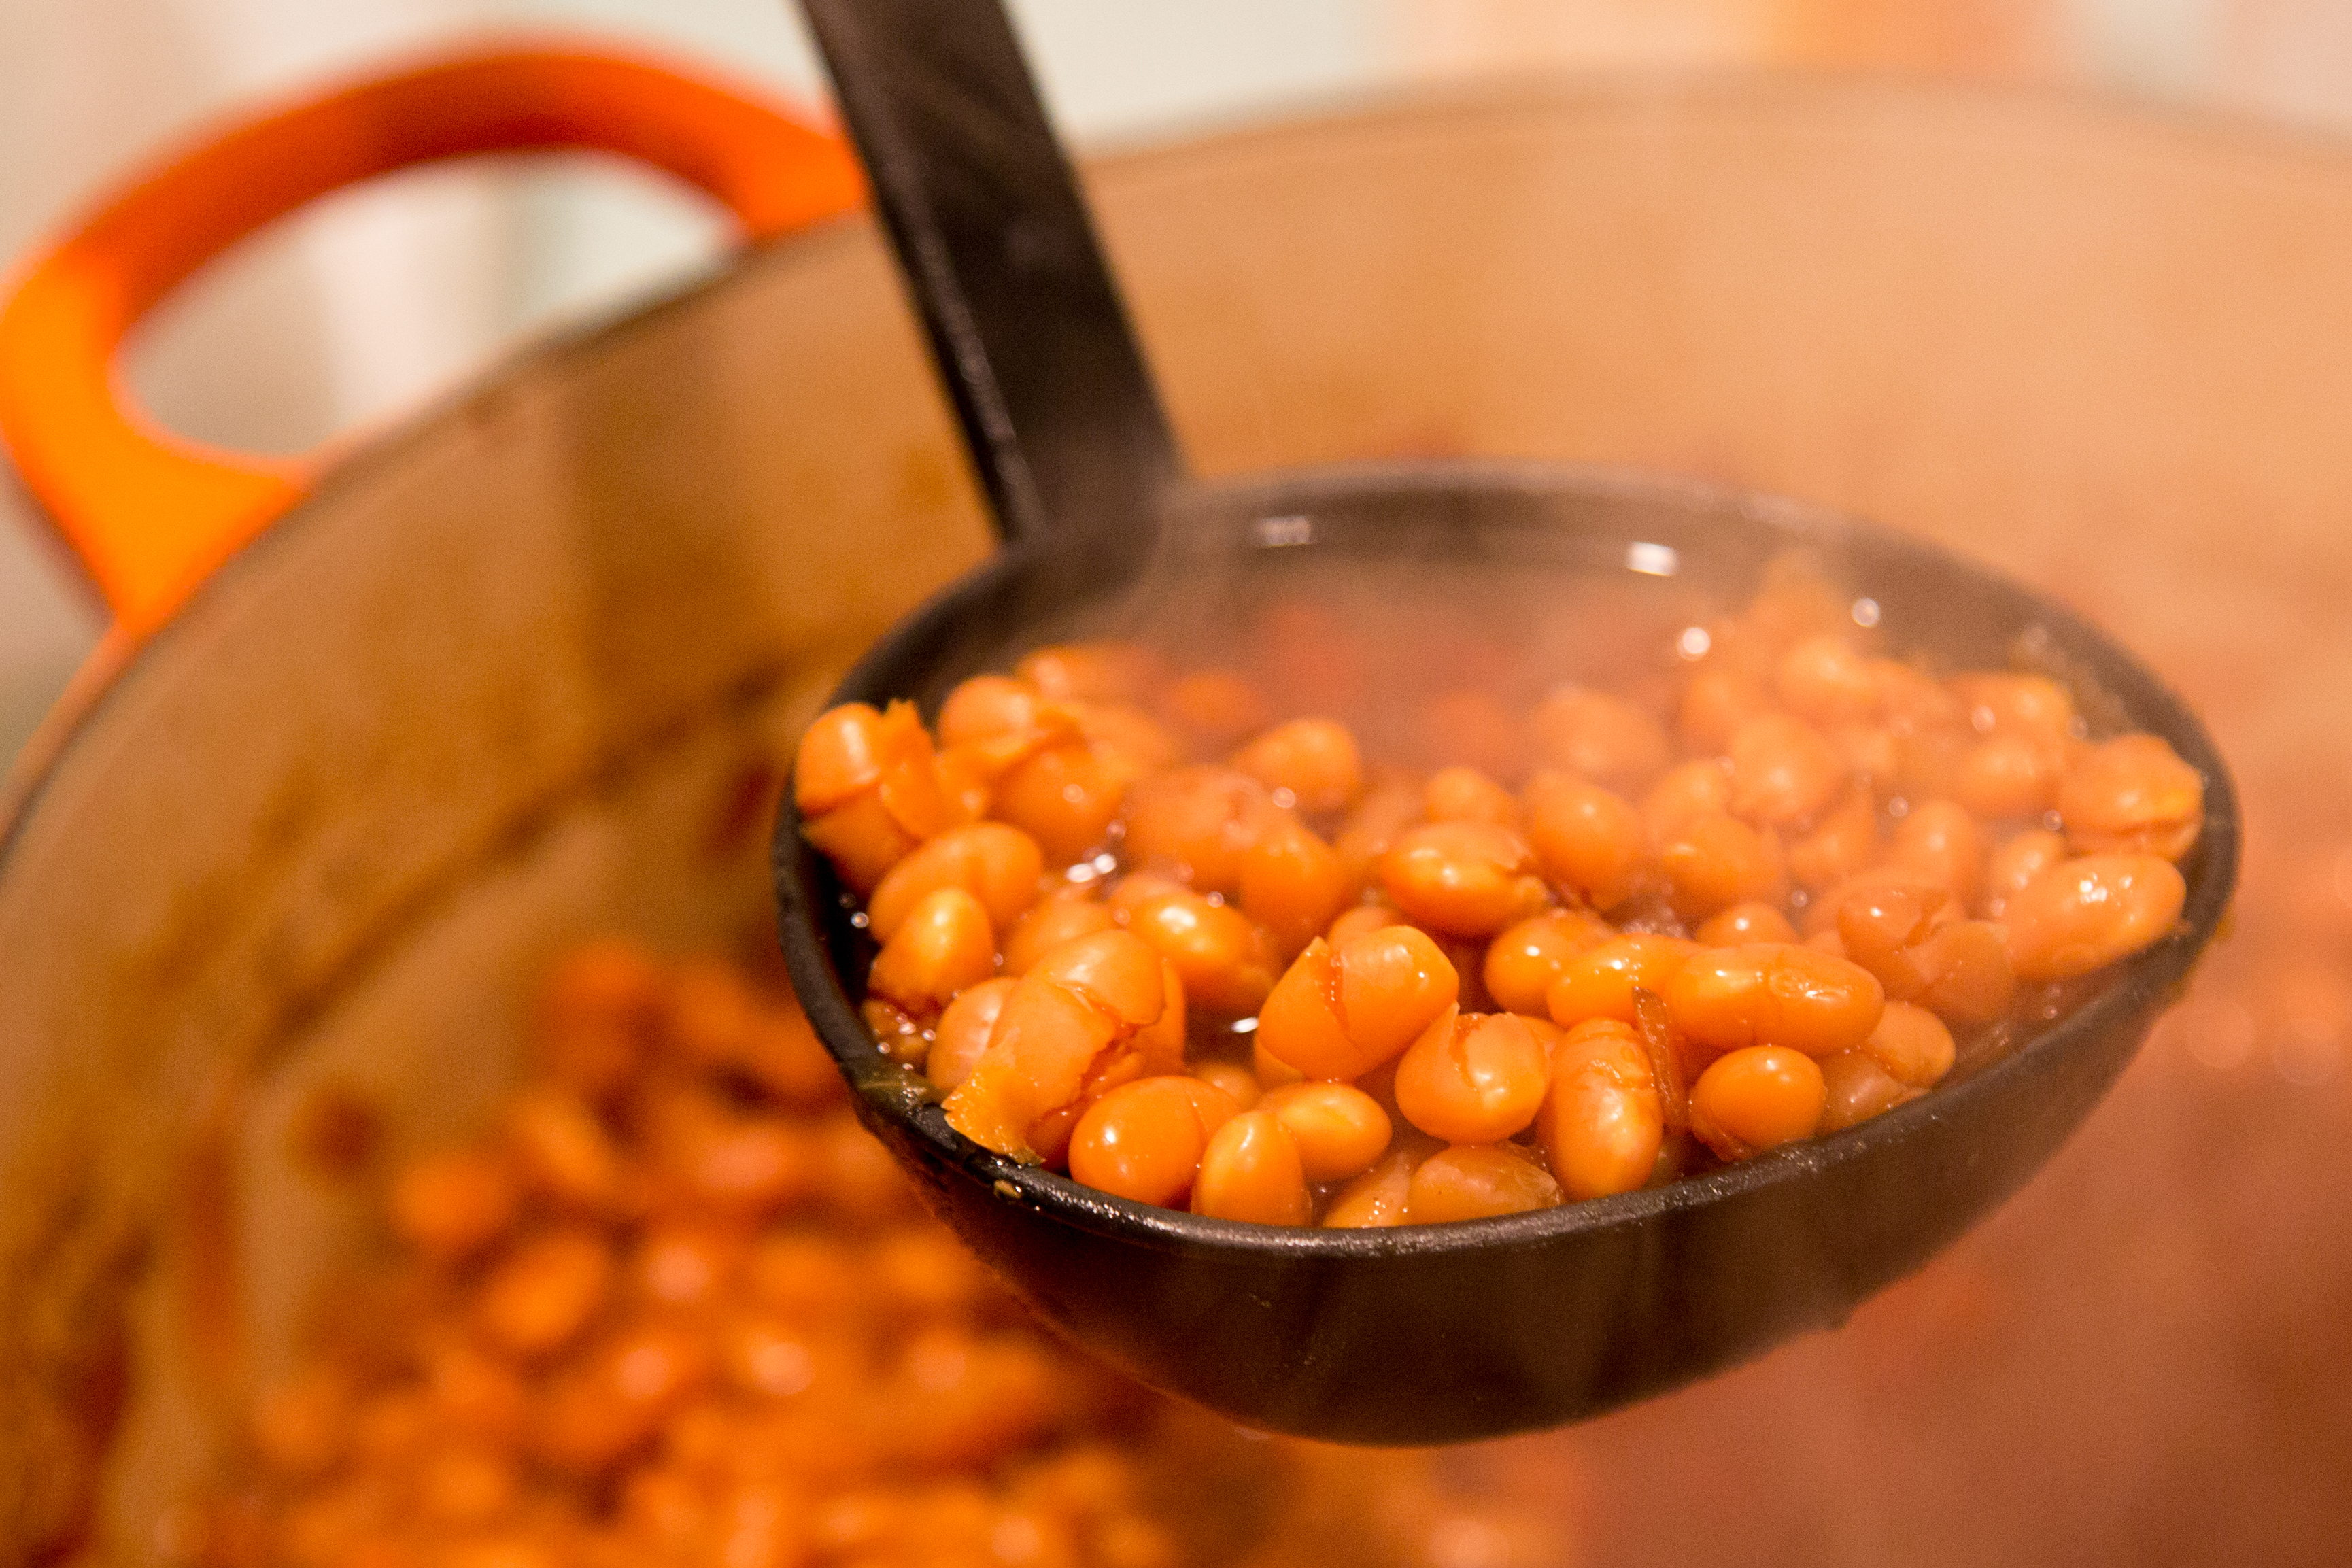 Boston_Baked_Beans_in_Concord,_Mass_2012-0193